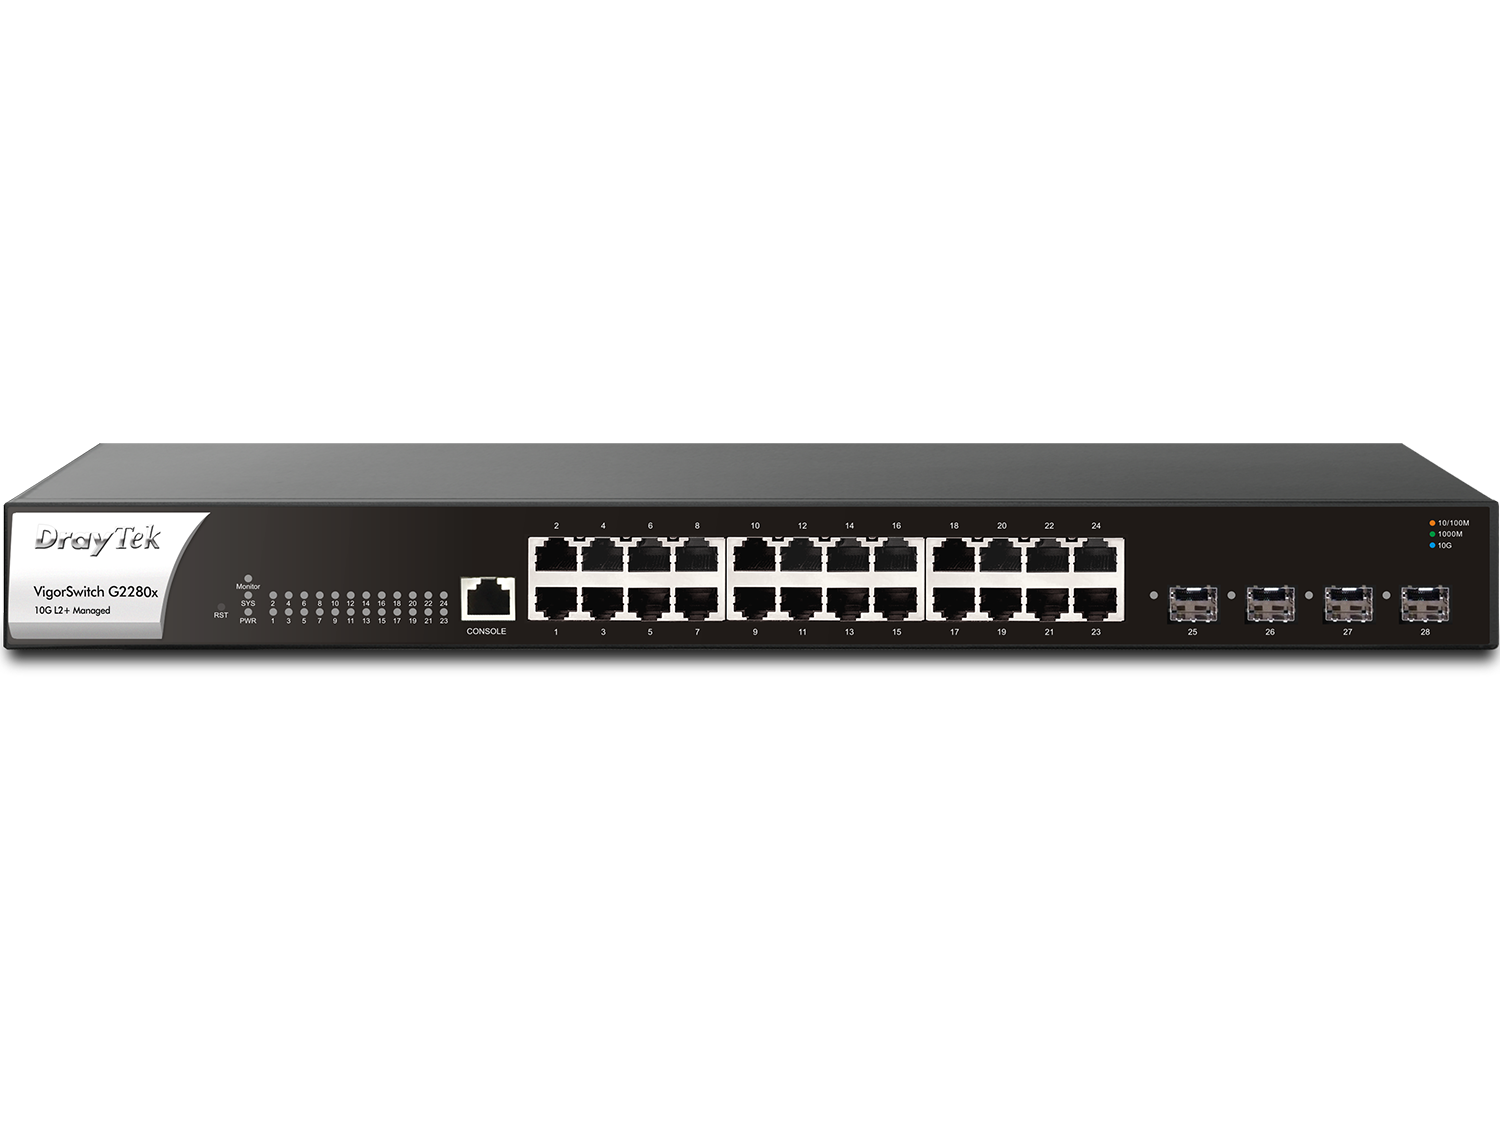  Managed Switch: 28-Port L2+ with 4 x 10GbE SFP+ slots, 24 x GbE ports, and 1 x Console port  